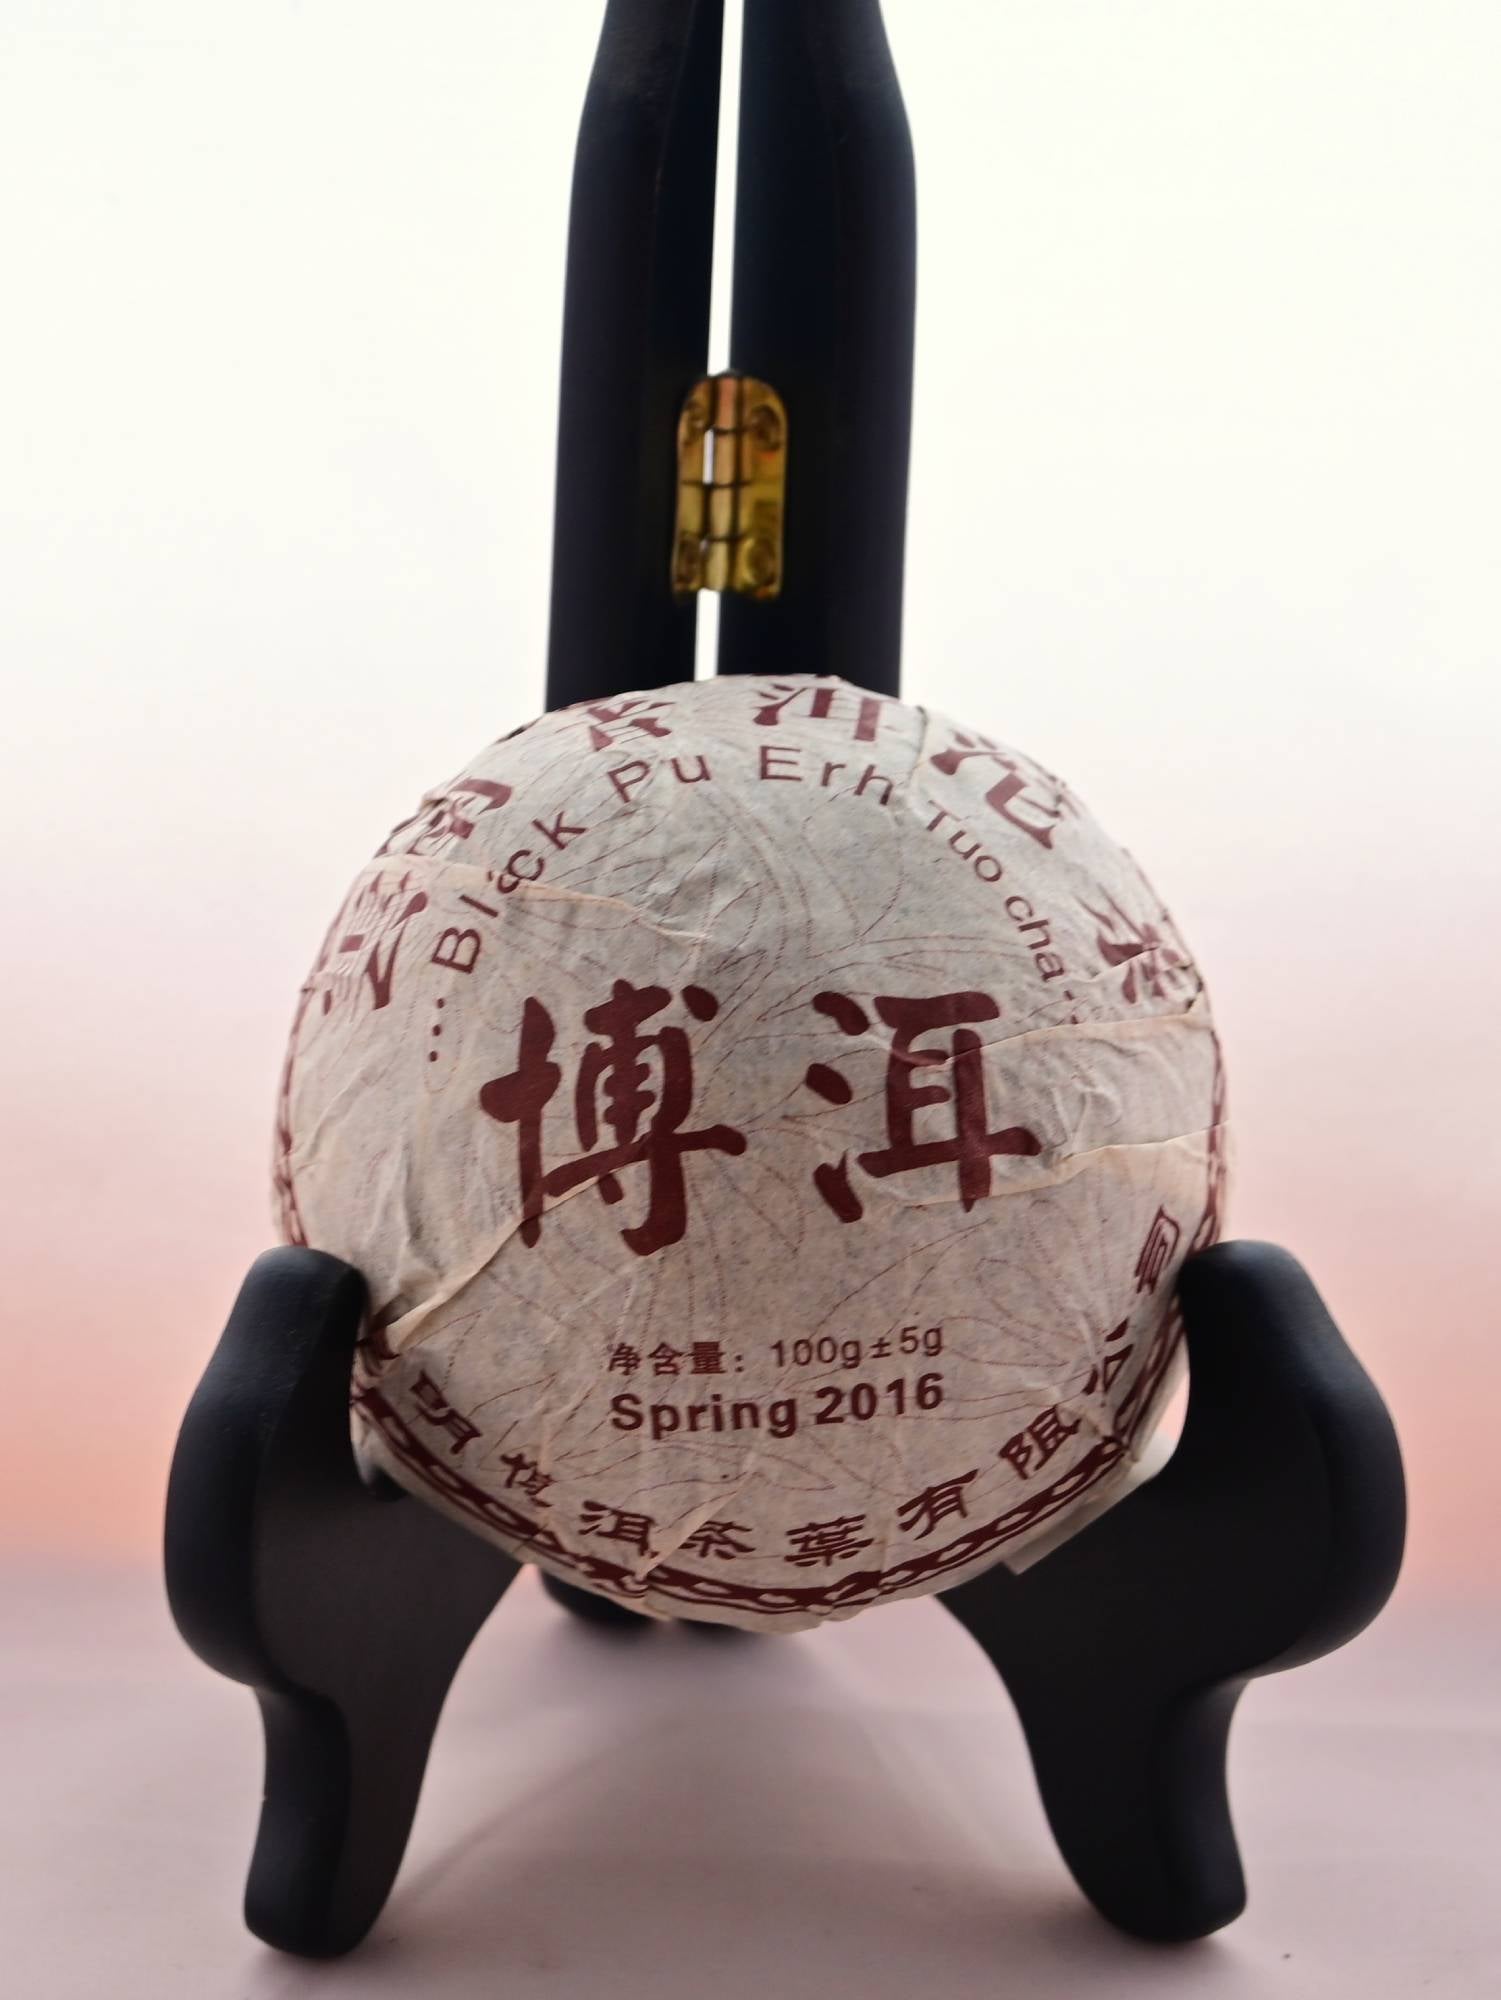 The Xiang Wei Tuo Cha dome rests in a black book holder. It is wrapped in white tissue paper with red designs of flowers in the background. Chinese letters circle the outside, with English translations inside reading: "Black Pu Erh Tuo Cha. Spring 2016. 100 grams."